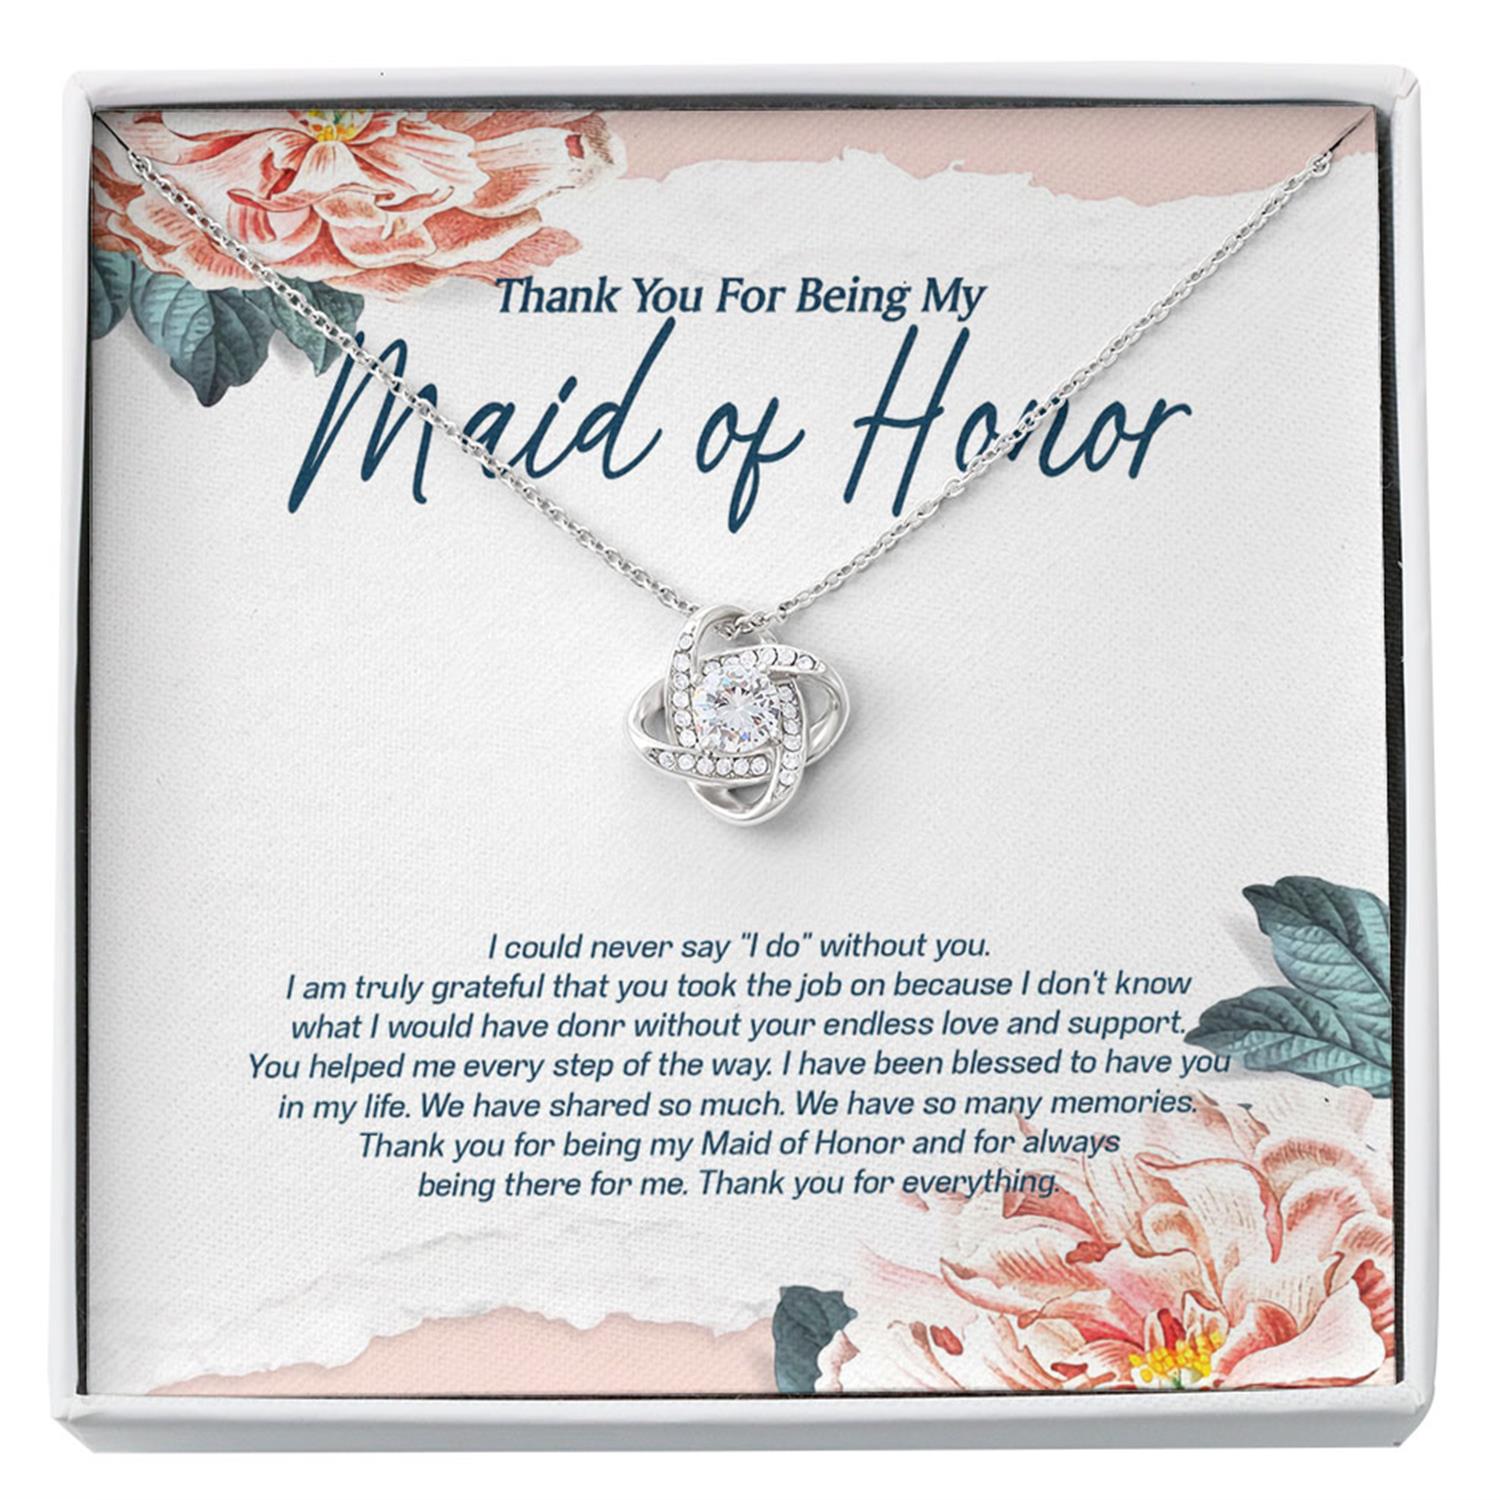 Maid Of Honor Necklace Thank You Gift From Bride, Maid Of Honor Gift Necklace, Matron Of Honor Gift, Bridesmaid Gift, Gift From Bride Custom Necklace